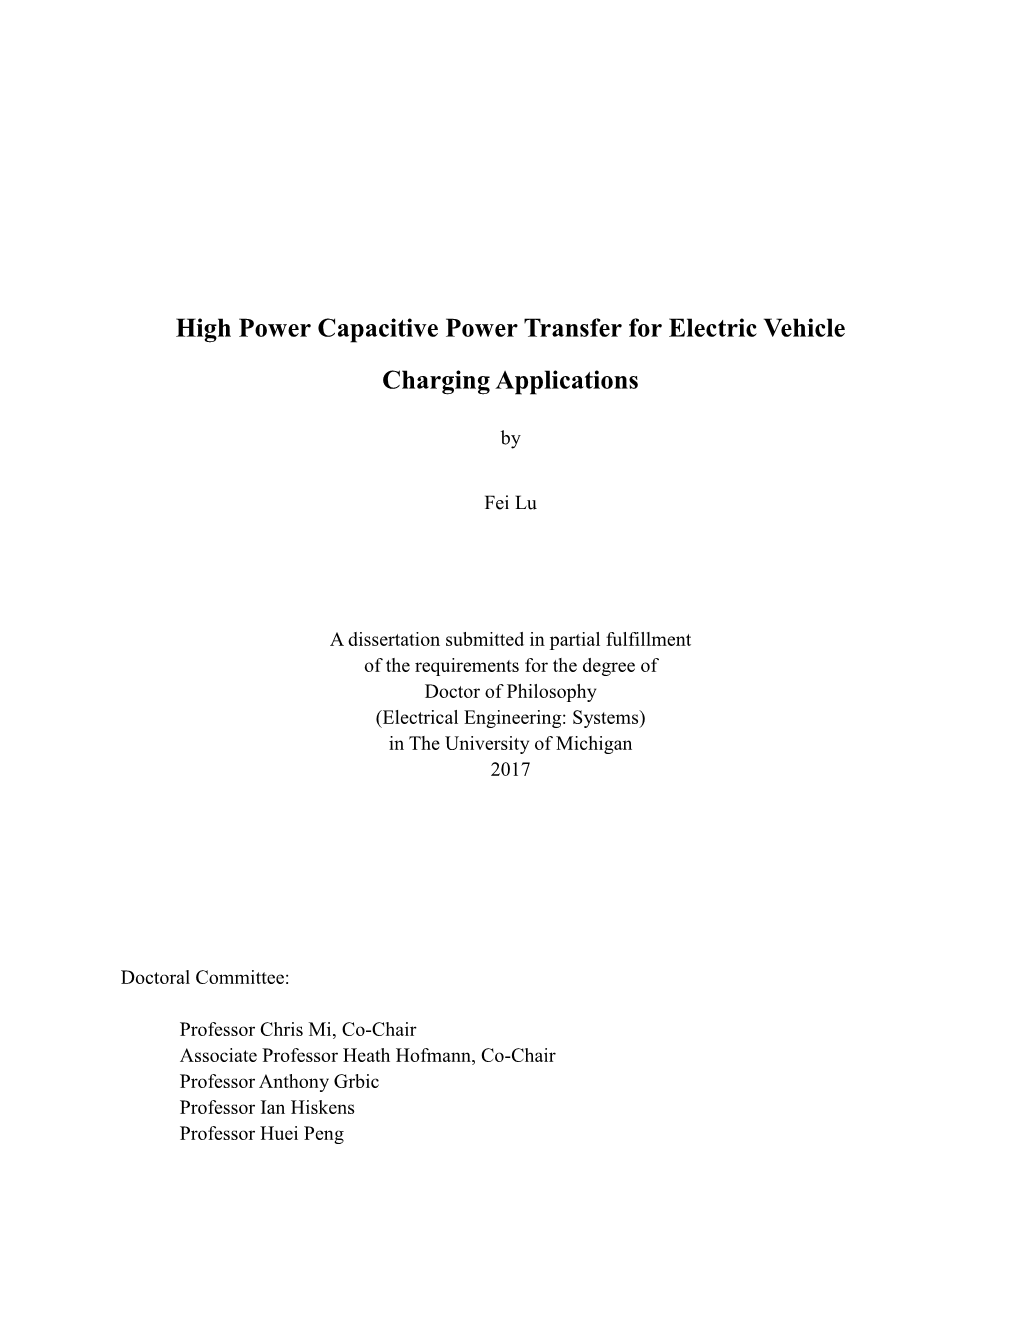 High Power Capacitive Power Transfer for Electric Vehicle Charging Applications